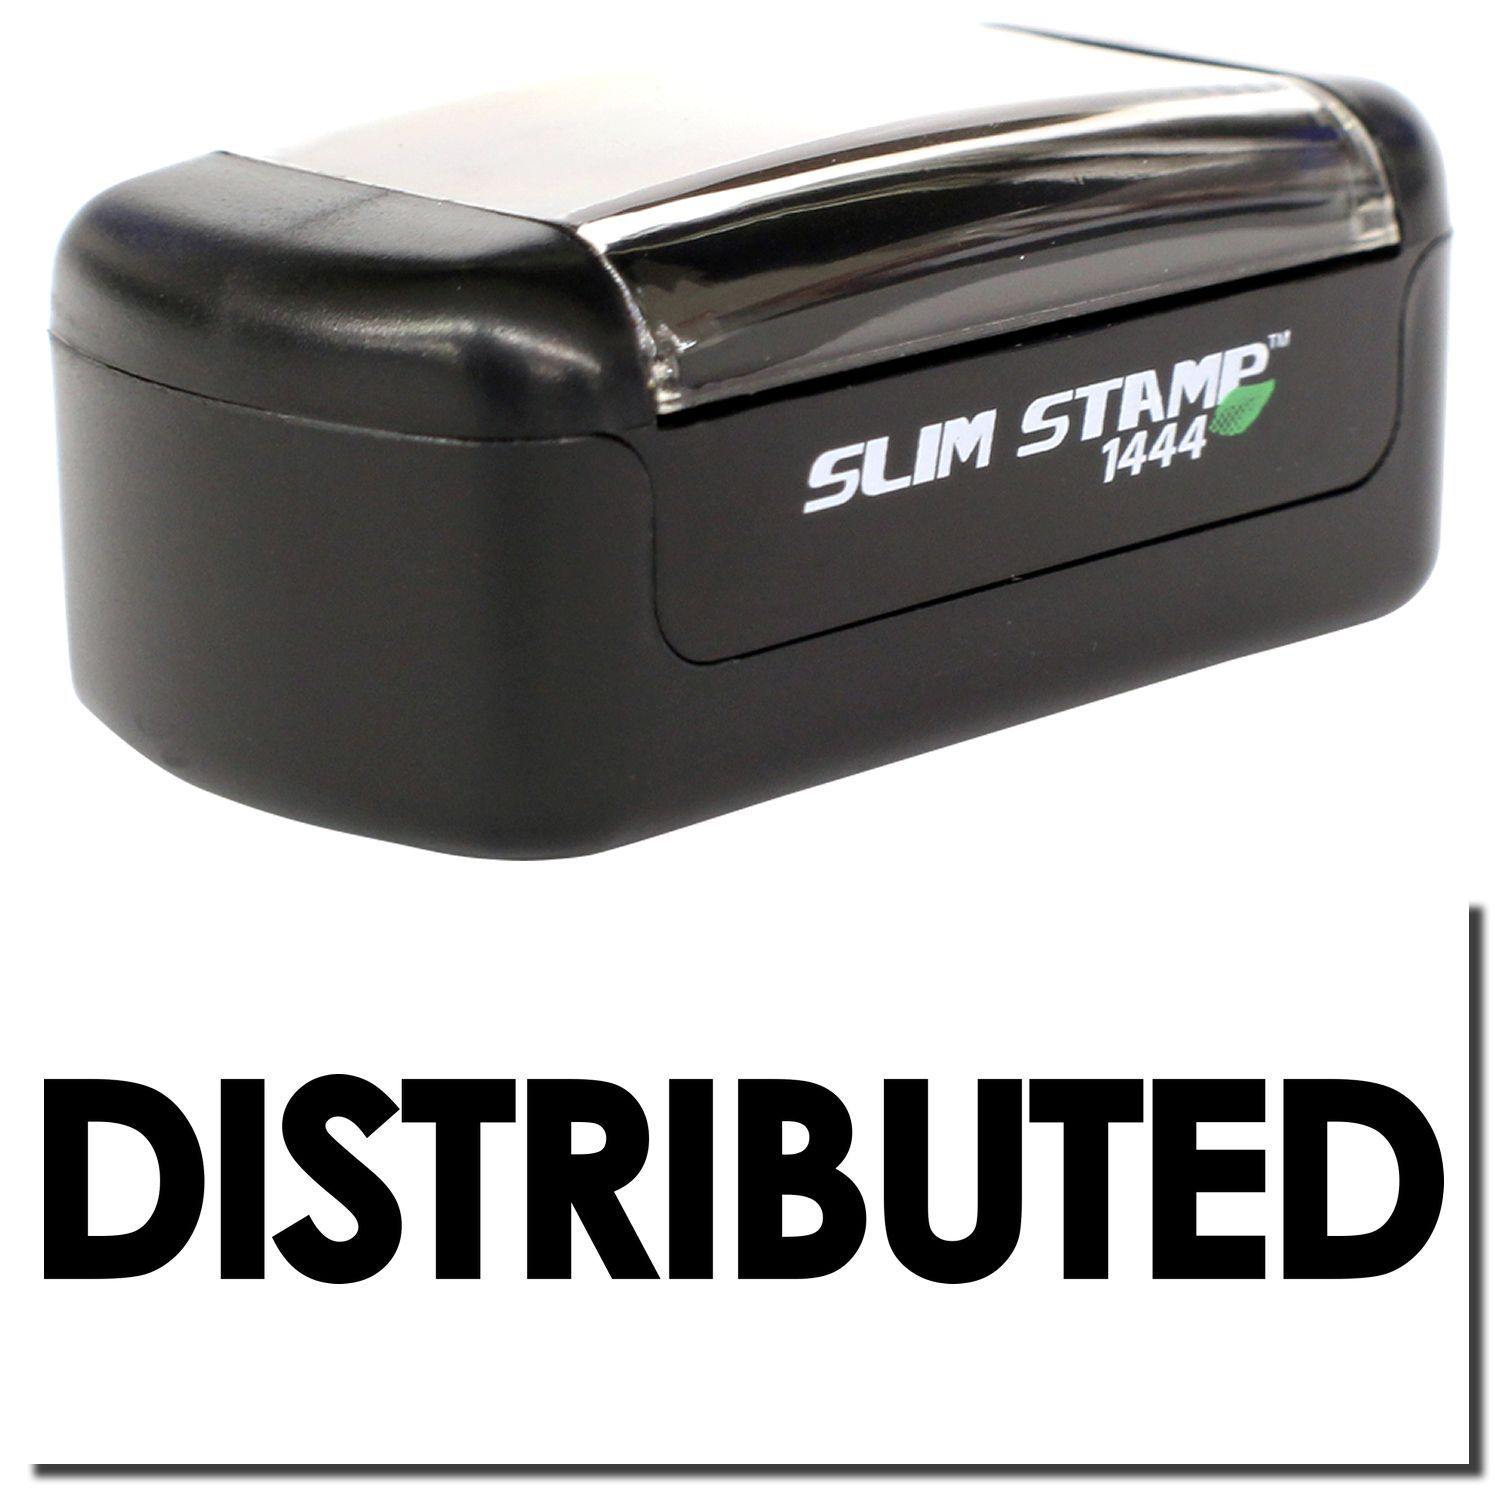 A stock office pre-inked stamp with a stamped image showing how the text "DISTRIBUTED" in bold font is displayed after stamping.